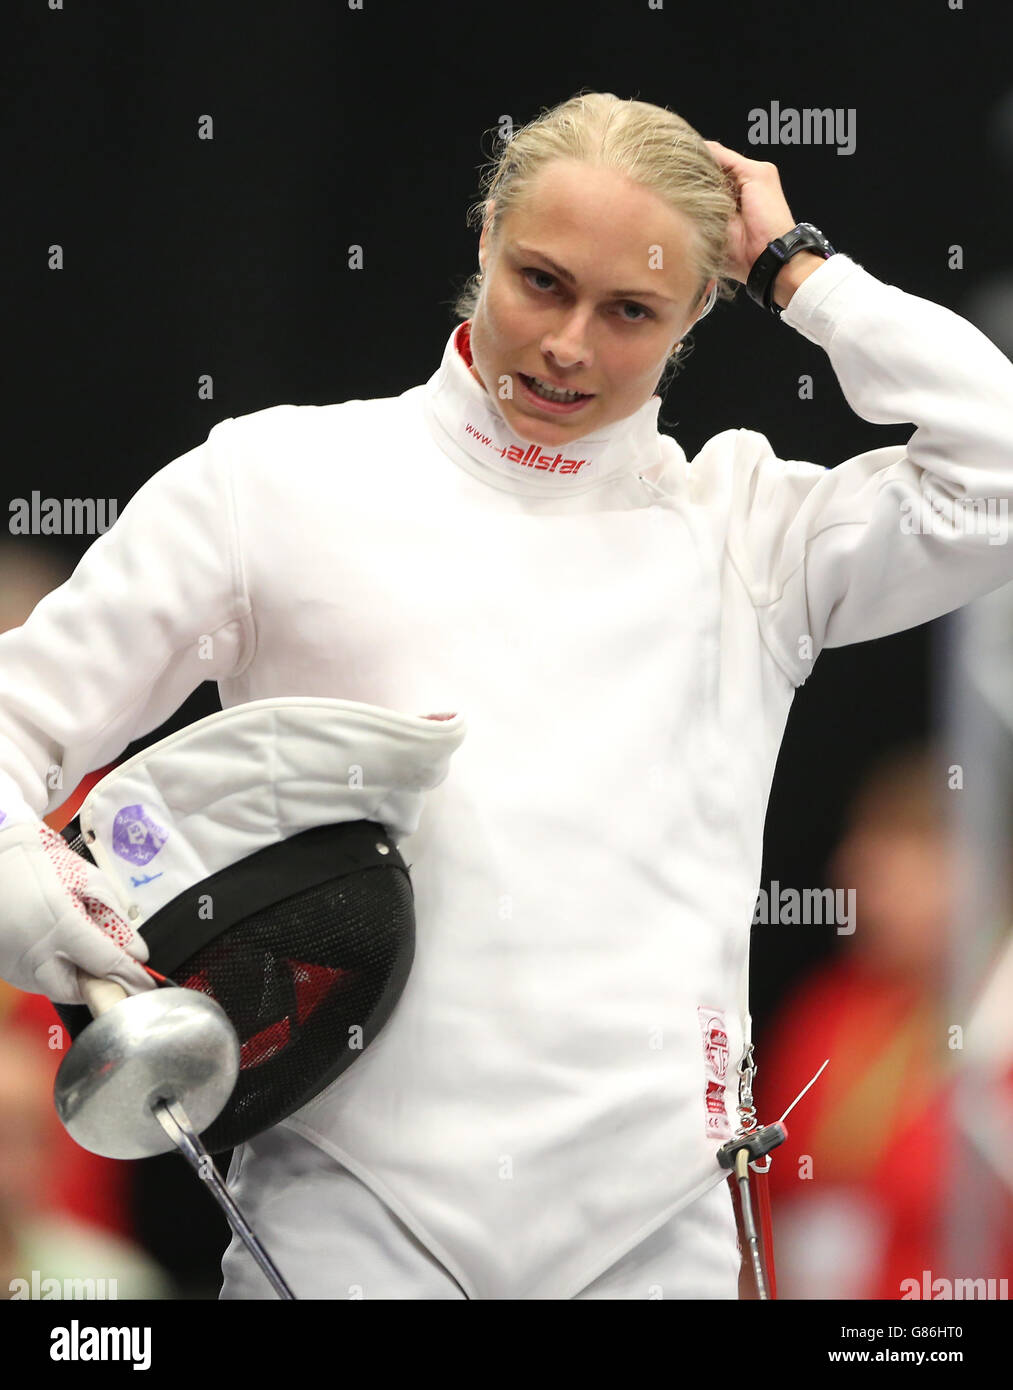 Russia's Svetlana Lebedeva during day two of the European Modern Pentathlon Championships at the University of Bath. PRESS ASSOCIATION Photo. Picture date: Wednesday August 19, 2015. See PA story PENTATHLON European. Photo credit should read: Tim Goode/ PA Wire Stock Photo